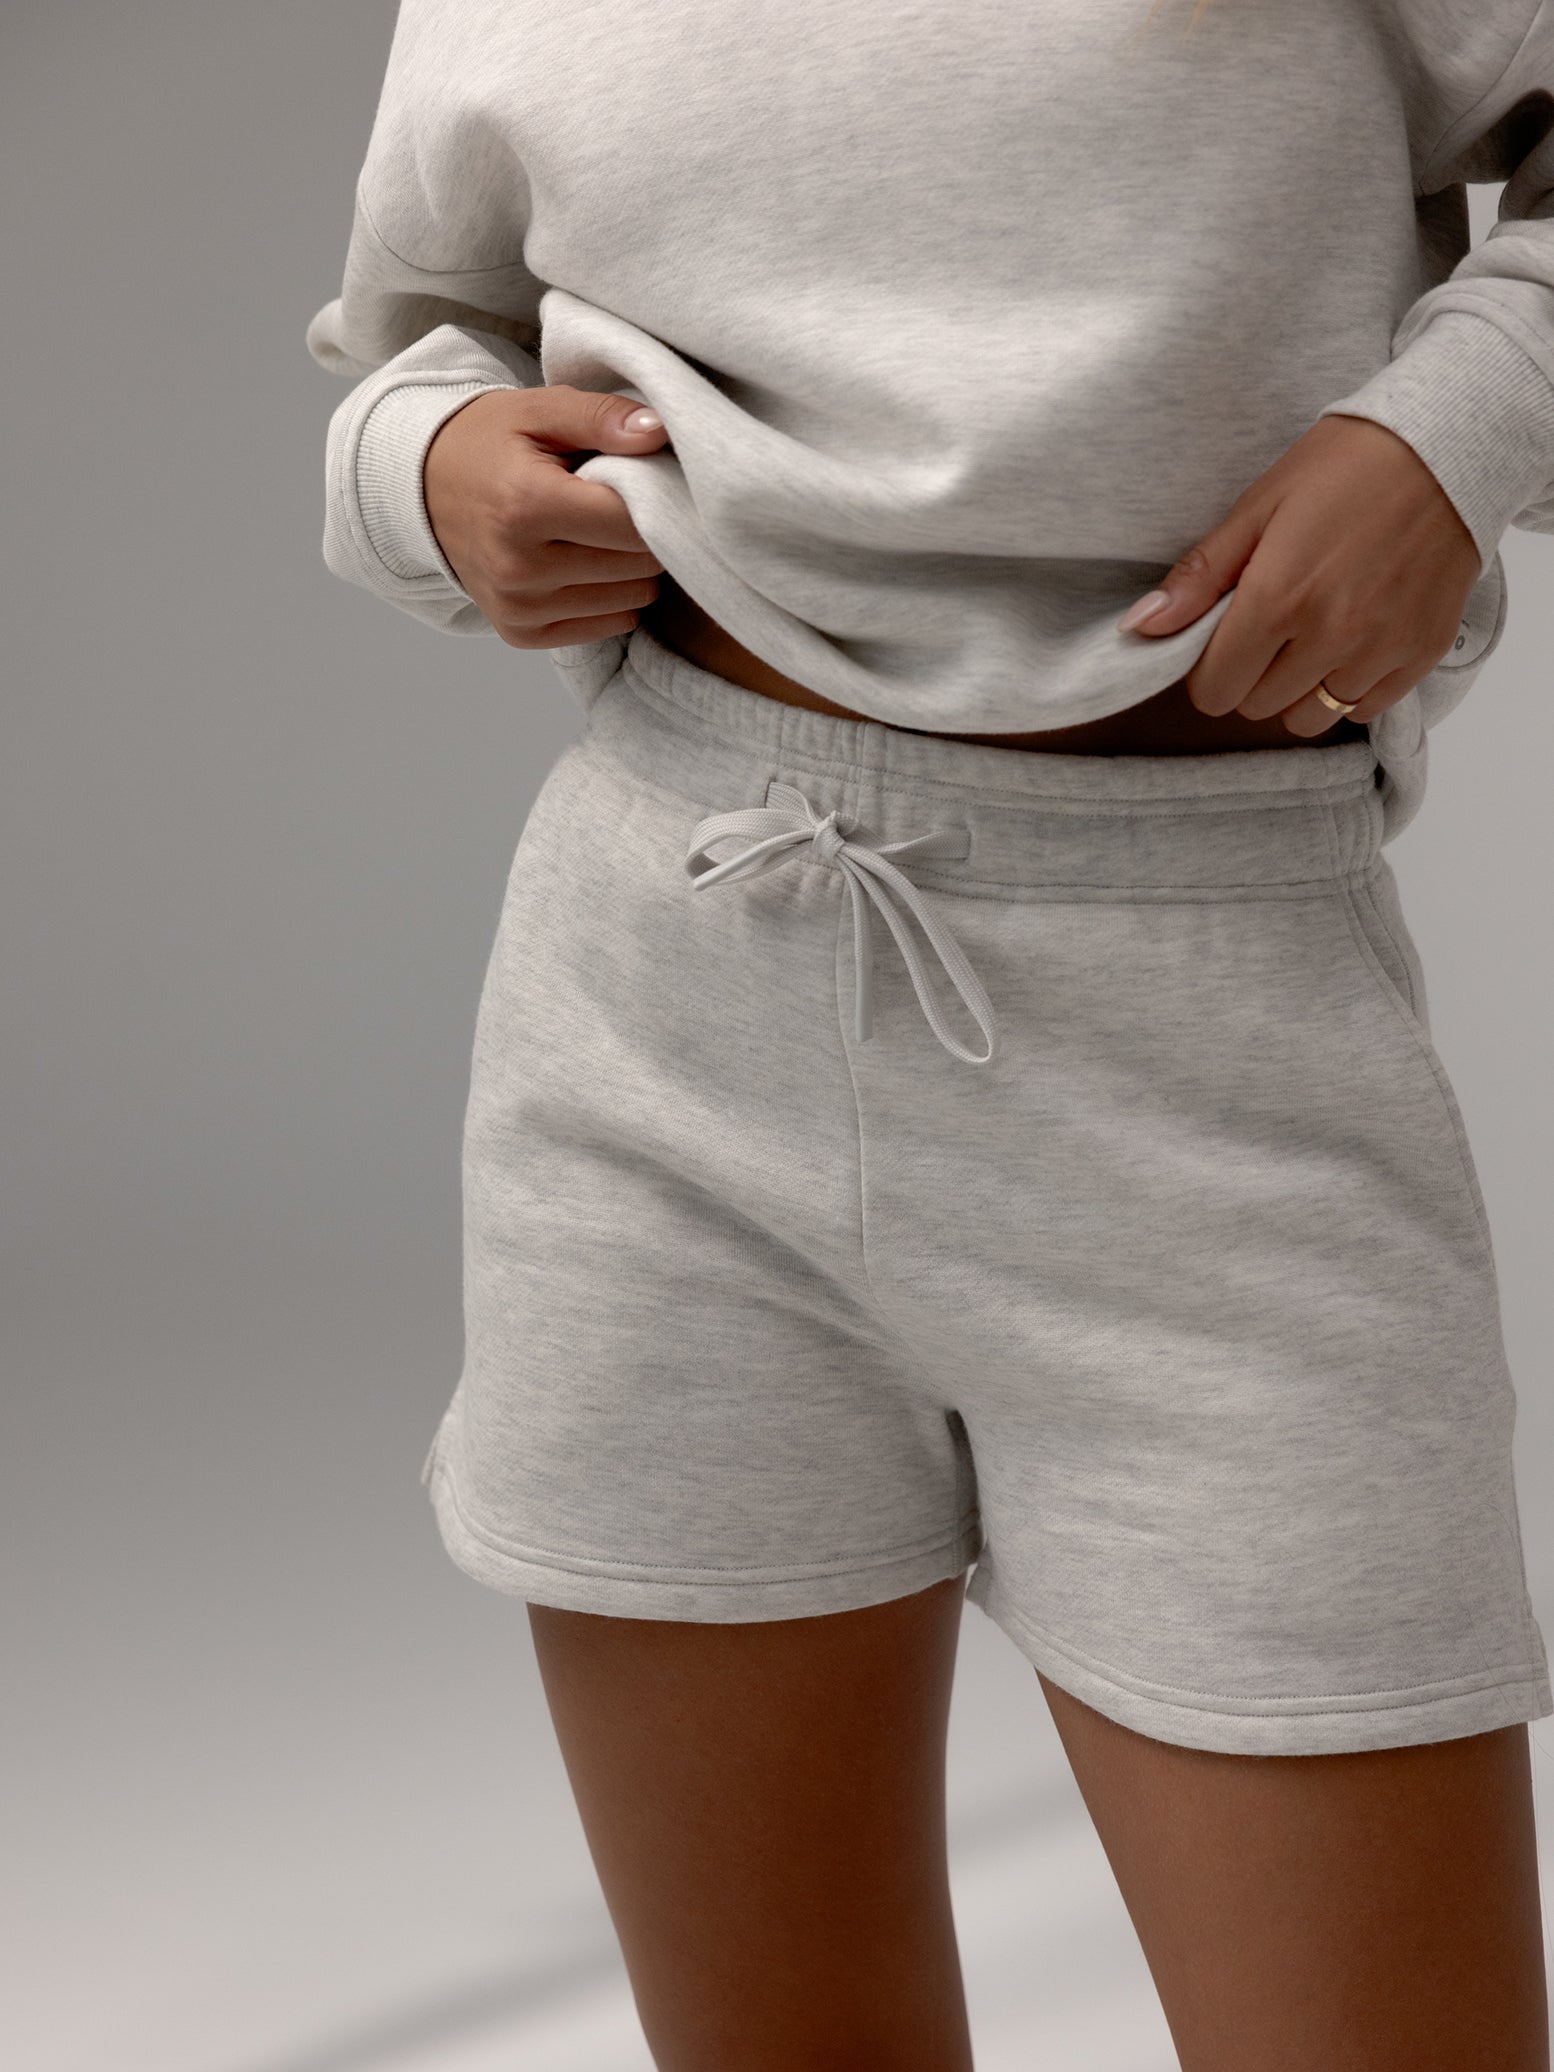 Heather Grey CityScape Shorts. The shorts are being worn by a female model. The background it a grey hue background. 